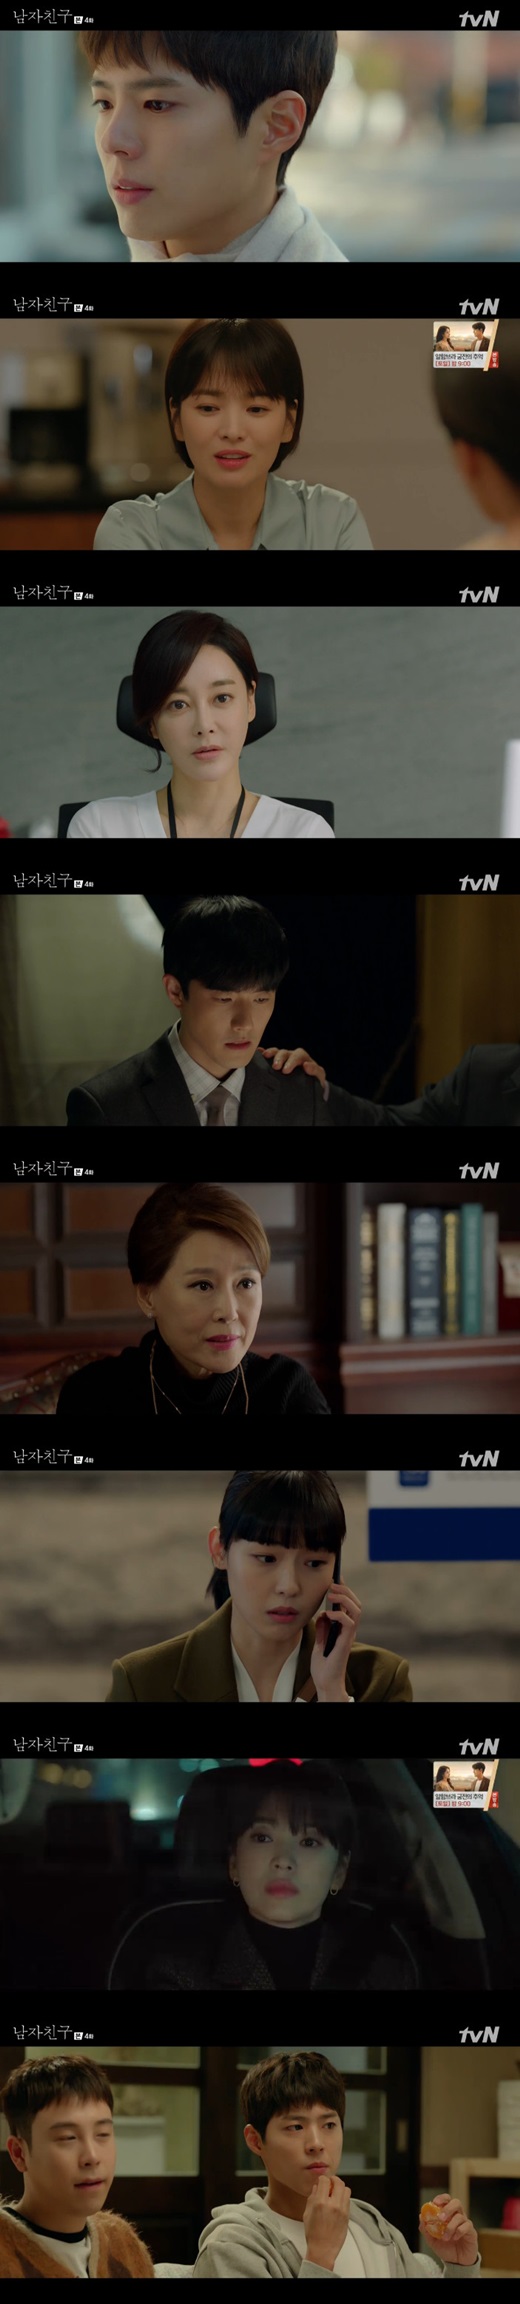 Friend Park Bo-gum straightens his mind on Song Hye-kyoIn the fourth episode of the cable channel tvN drama Man Friend (played by Yoo Young-ah, directed by Park Shin-woo), which was broadcast on the afternoon of the 6th, Kim Jin-hyuk (Park Bo-gum), who is a contestant to Cha Claudia Kim (Song Hye-kyo), was portrayed.Kim Jin-hyuk told Claudia Kim that she wanted to see and that she was delighted that someone wants to see me, it feels good.But it is a very dangerous word. I will not hear it. Jinhyuk said, The earth is very wide, and I met in one country, one place, and I came back from one day and met as a representative and employee in one company.Claudia Kim told Jinhyuk, who was asleep, I had no Friend since I was a child, and when I got to know him, I had to get away again.So I learned to think its all bad, he said, so I want to stop the painful thing. He mentioned why he was trying to abandon Jinhyuks straight-line Confessions.Claudia Kim tried to push Jinhyuk out of her mind, but she was driving while watching Jinhyuk, and she ran to Claudia Kim and said, Is there any injuries?I was worried about Claudia Kim first, Claudia Kim said, Look, Kim Jin-hyuk, what do you know about me?So Jinhyuk said, I will do one more thing. He grabbed Claudia Kims hand and put him in the car and walked him home.I also waited 12 oclock and celebrated Claudia Kims birthday and presented lipstick.Kim Hwa-jin (Cha Hwa-yeon), the mother of Jung Woo-seok (Jang Seung-jo), called Cho Hye-in (Jeon So-ni) and wrote a scenario to create a rumor of Jin Hyuk.Claudia Kims secretary, Jang Mi-jin (Kwak Sun-young), called Jin-hyuk separately and said, Do not meet Claudia Kim.Jin Hyuk said, Is it necessary for the secretary to organize the meeting with Friend?Mijin said, Kim Jin-hyuk is a funny day for small curiosity. ITZY can only be reeled from small scratches.Jin-hyuk said, Its not fun to meet another world. Its amazing every day. Its a different world. Its amazing.I think that it is meaningful even if it is a very short time that a person puts a person in mind. On the other hand, there was a terrible rumor around Claudia Kim and Jinhyuk, which was done by Lee Jin-ho (Kim Ho-chang), who said he would do his loyalty to the company.